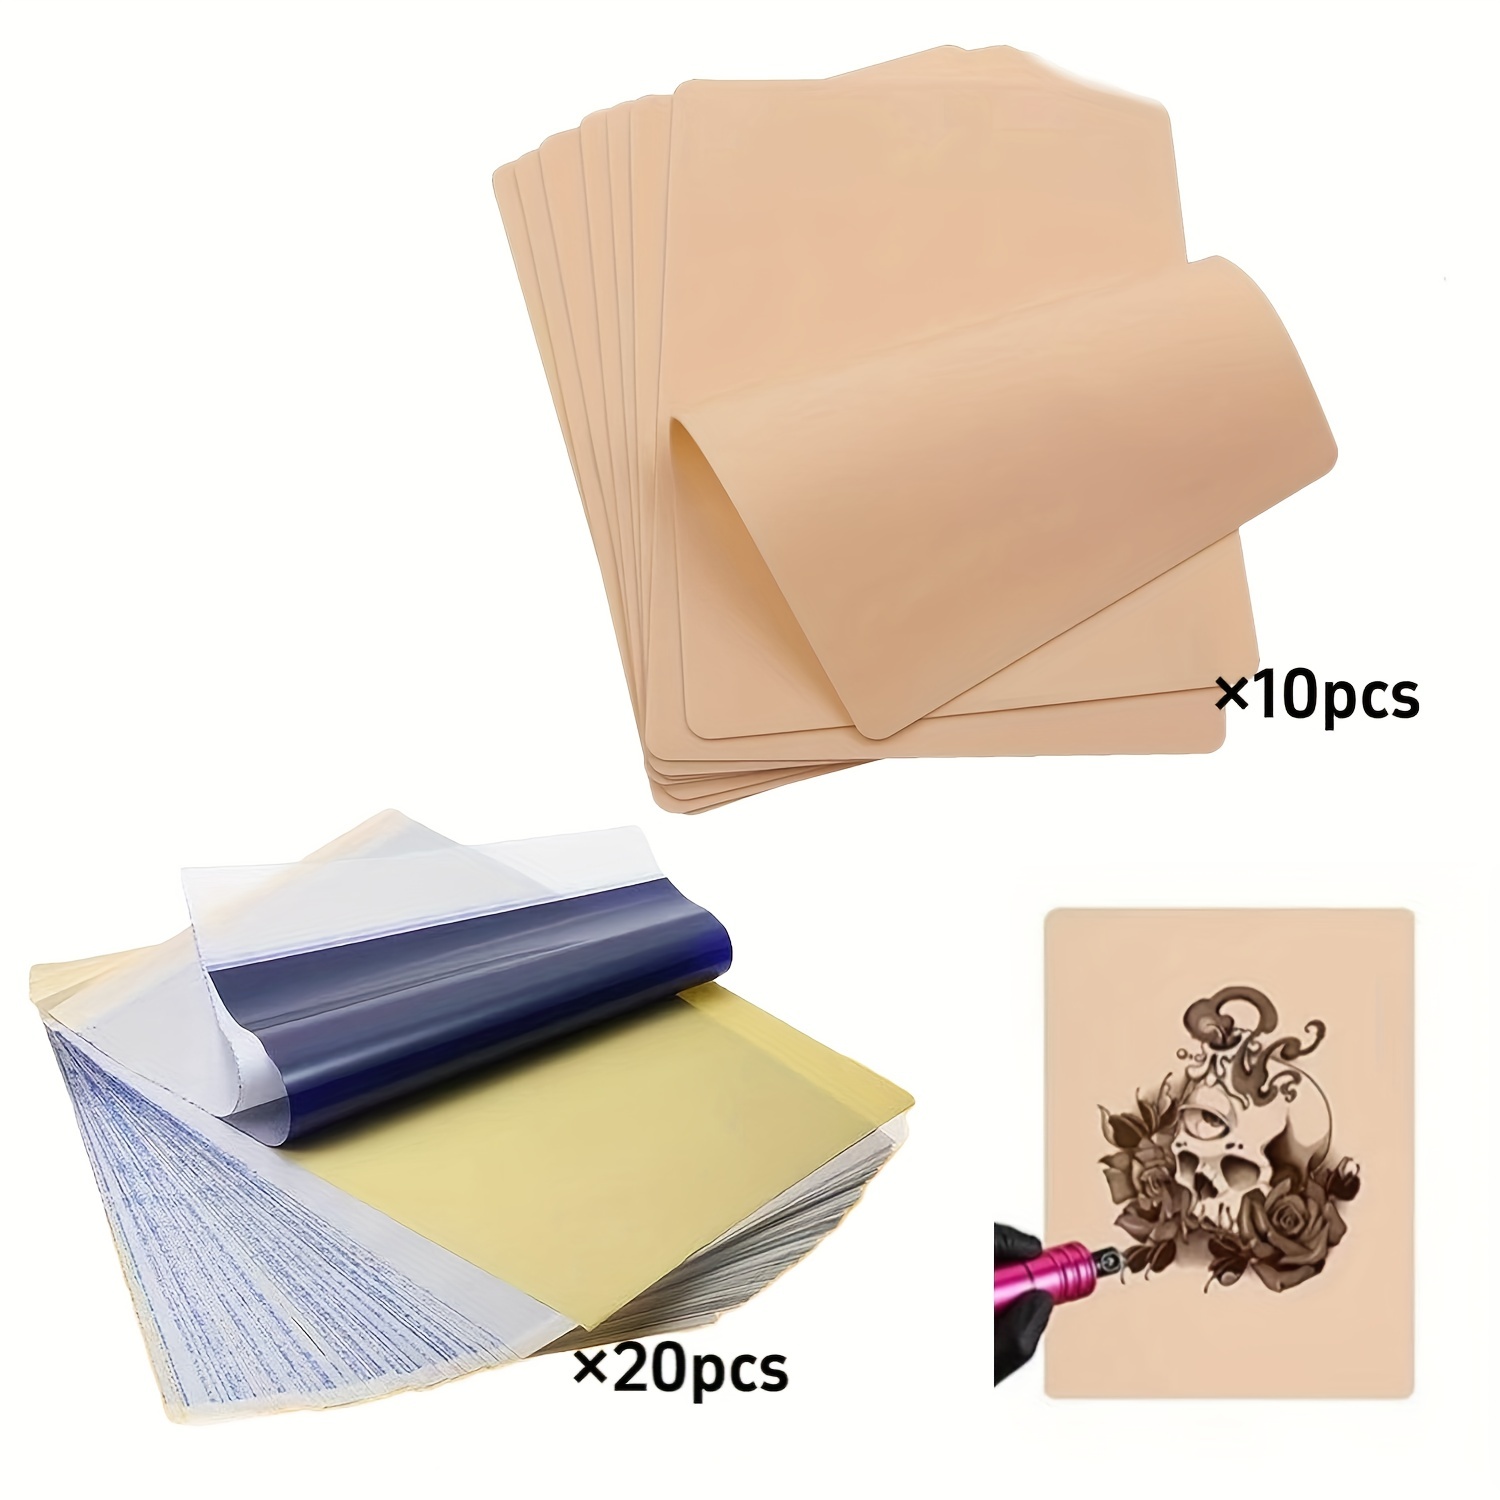 10pcs Tattoo Transfer Paper and 5pcs Practice Skin Blank Double